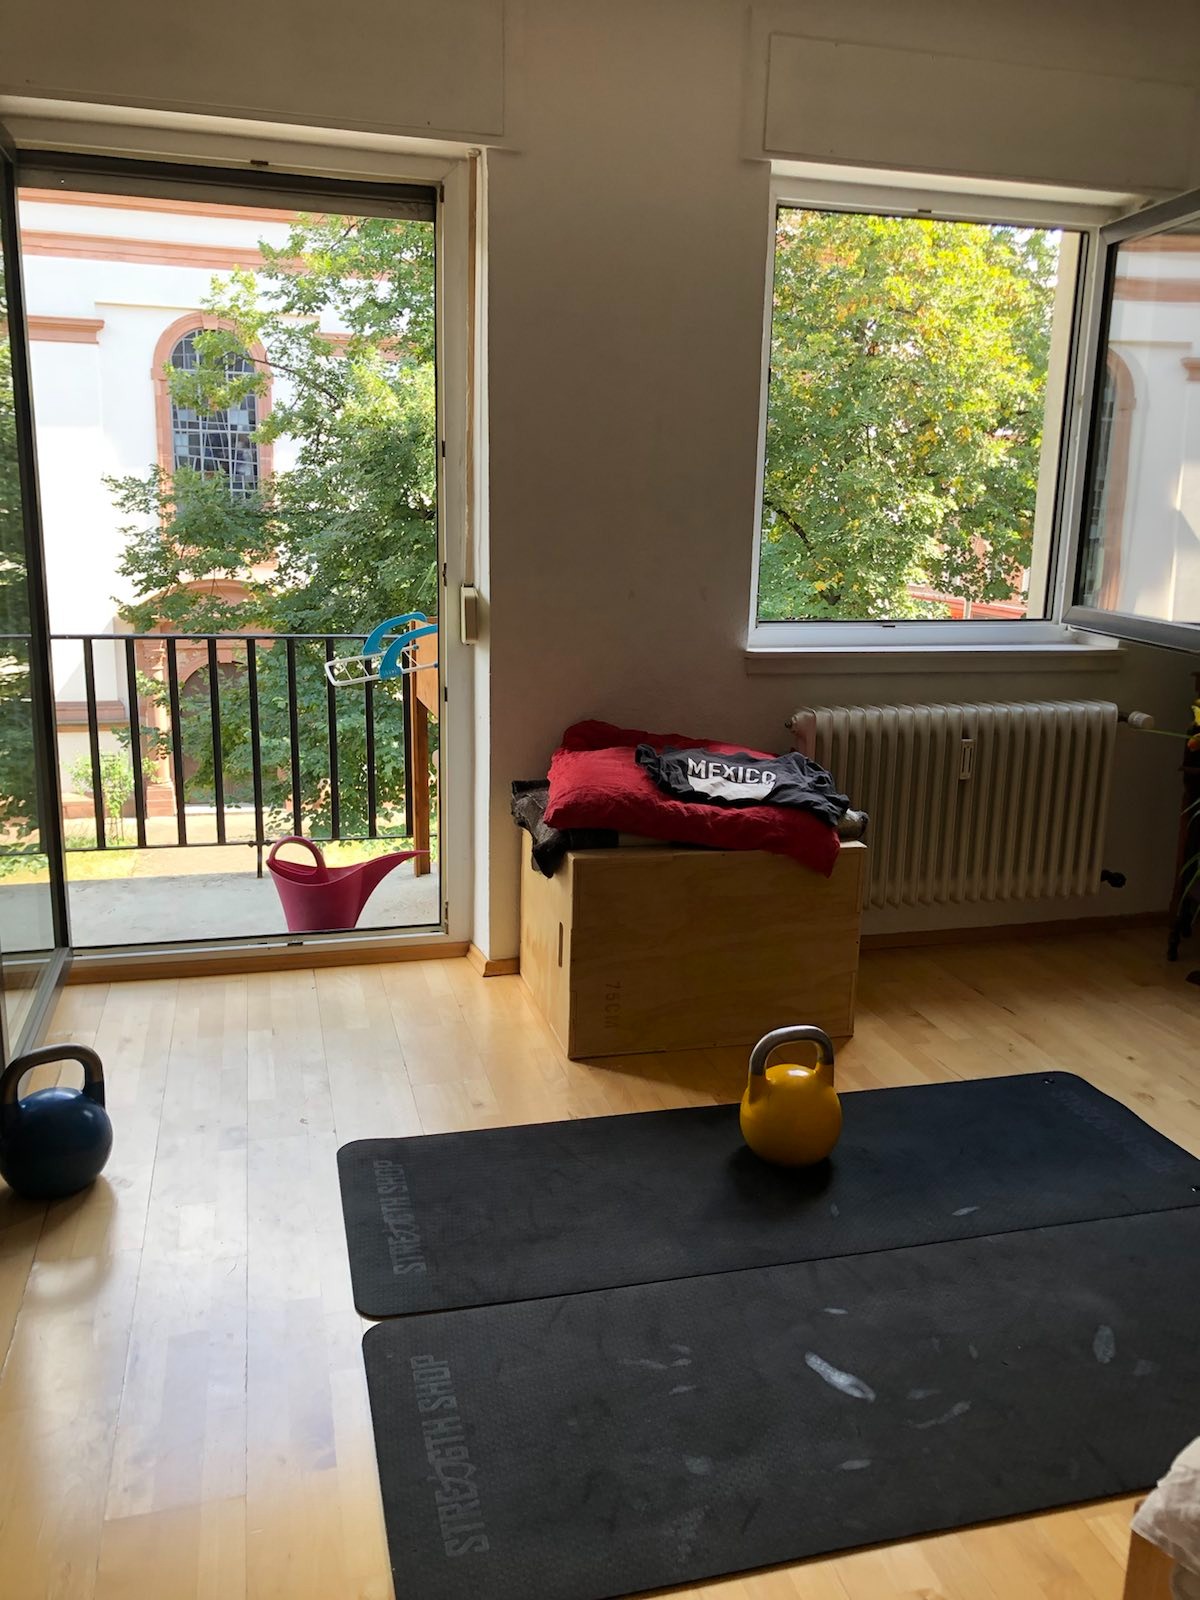 Training mats, a kettlebell, and the view outside.